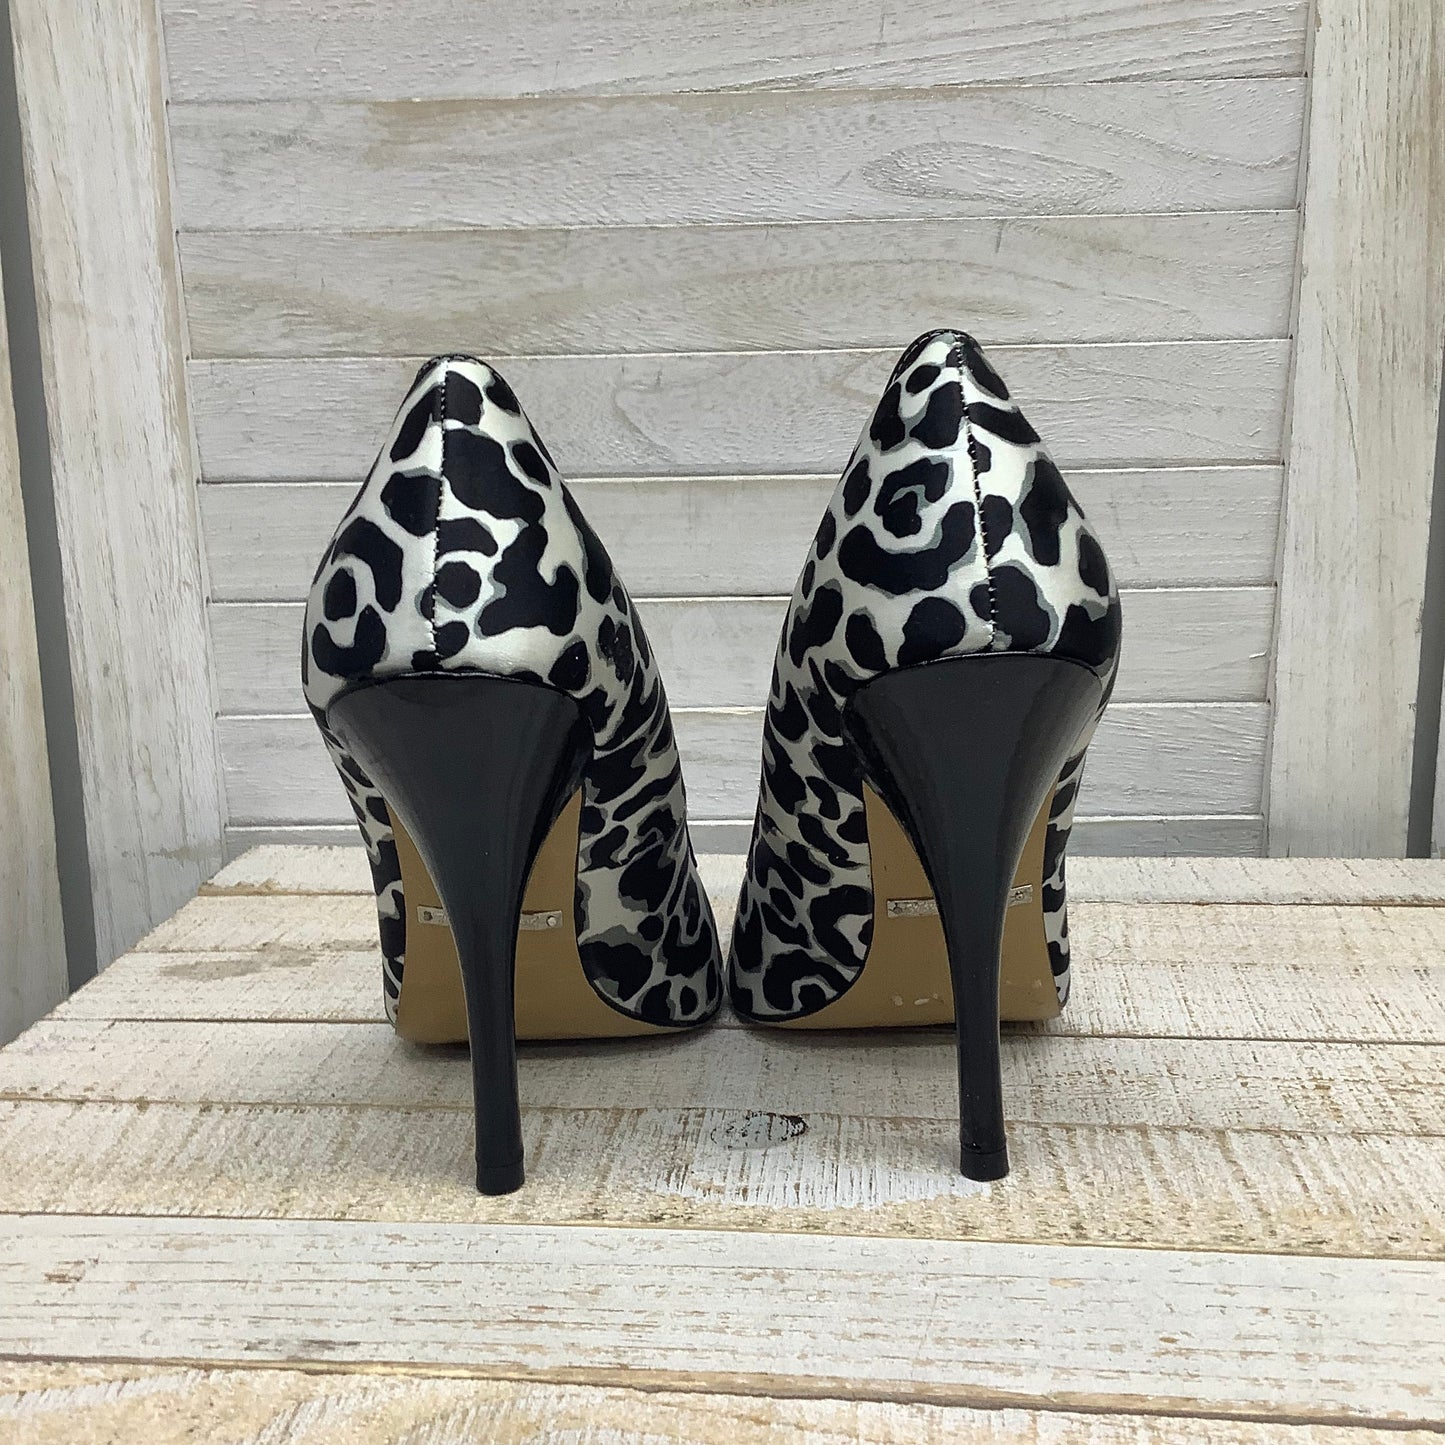 Shoes Heels Stiletto By Betsey Johnson  Size: 7